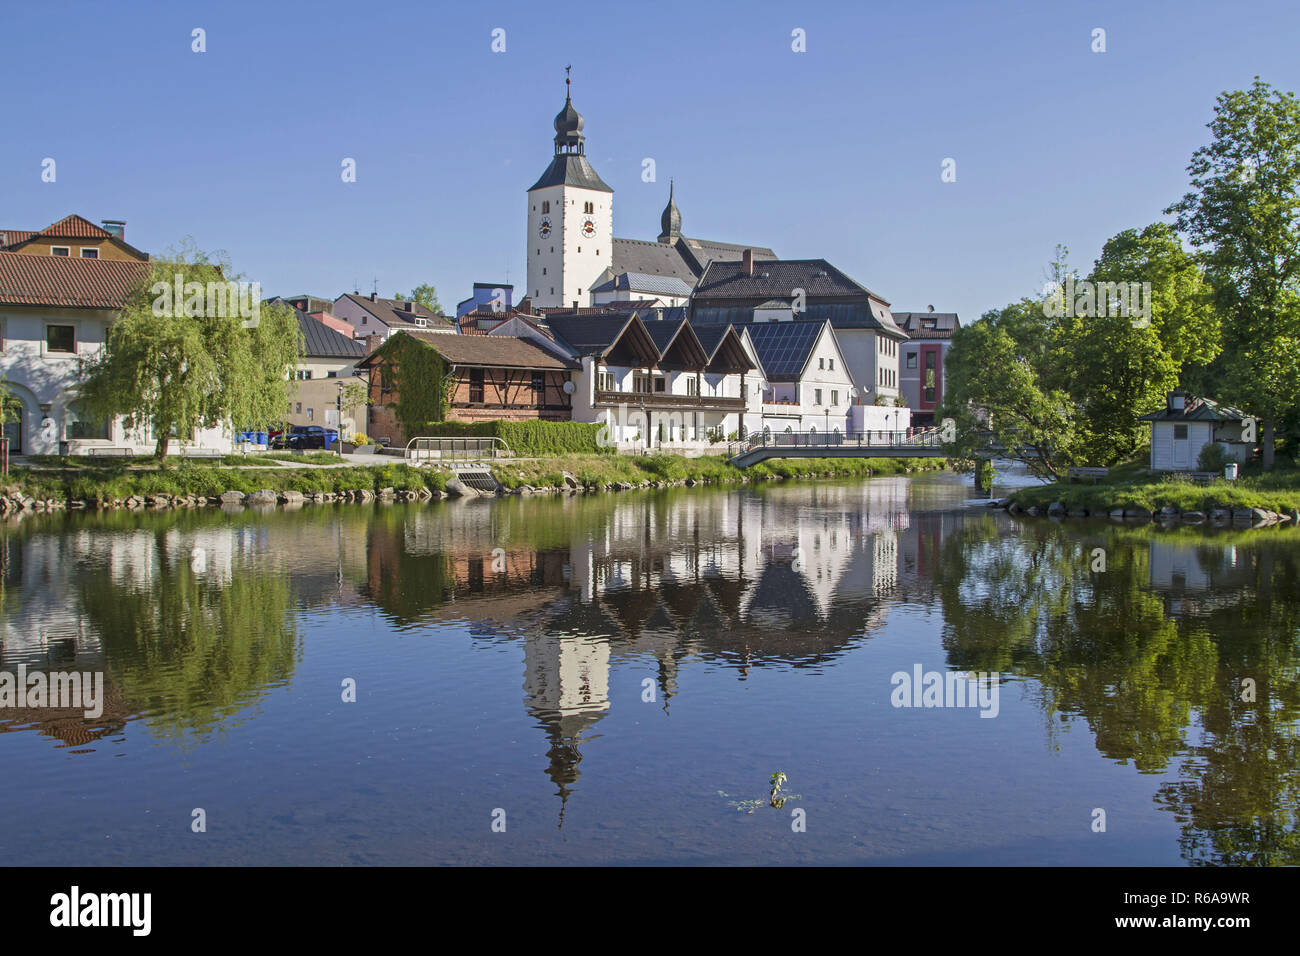 The County Town Of Regen Is Idyllically Located On The Banks Of The River Of The Same Name In The Administrative District Of Lower Bavaria Stock Photo